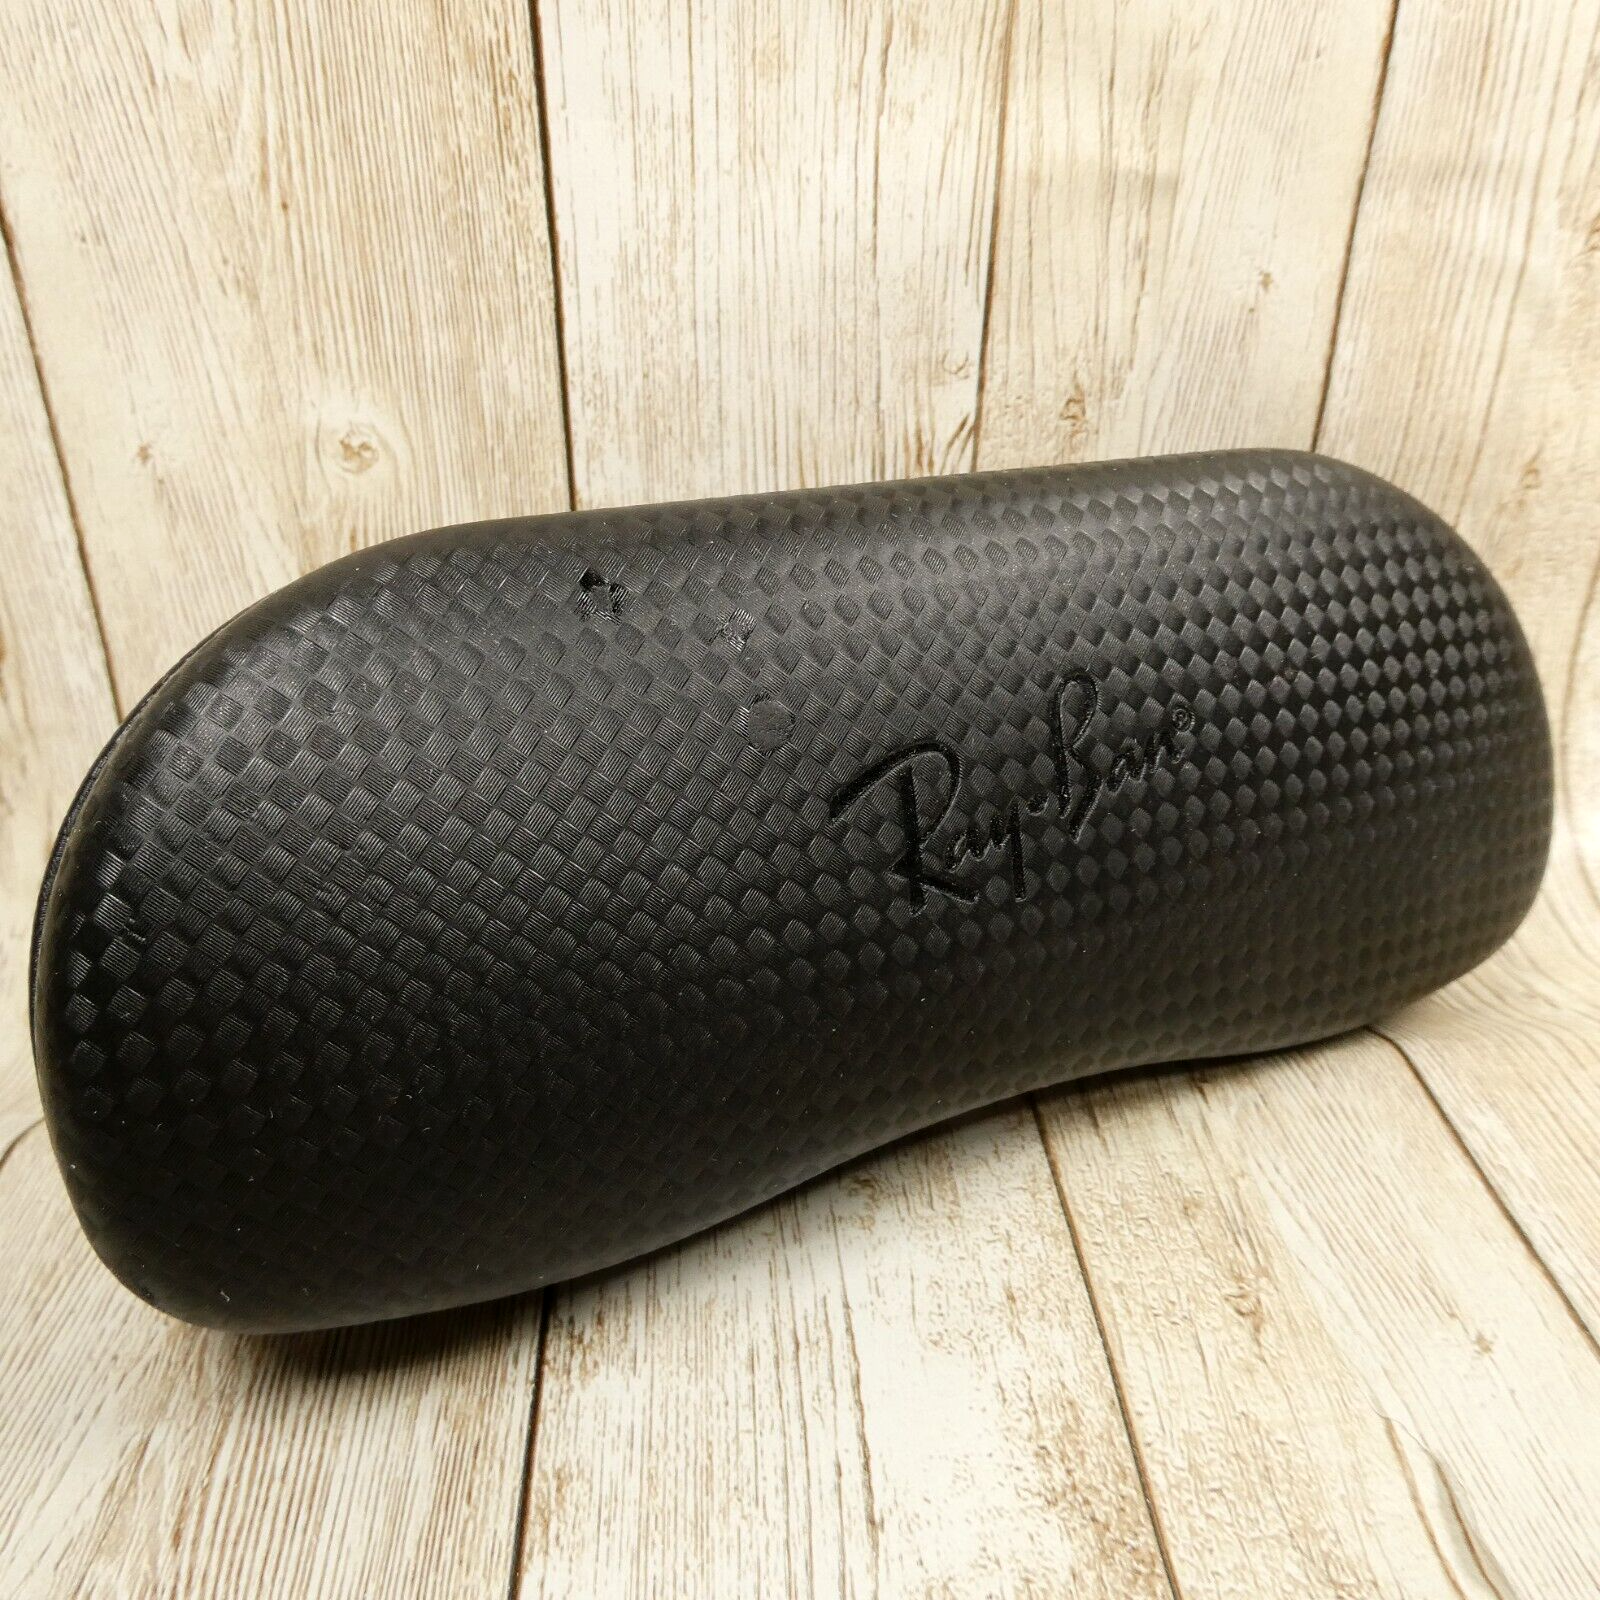 Primary image for Ray-Ban Black Carbon Fiber Style Eyeglass Hard Clam Shell CASE ONLY